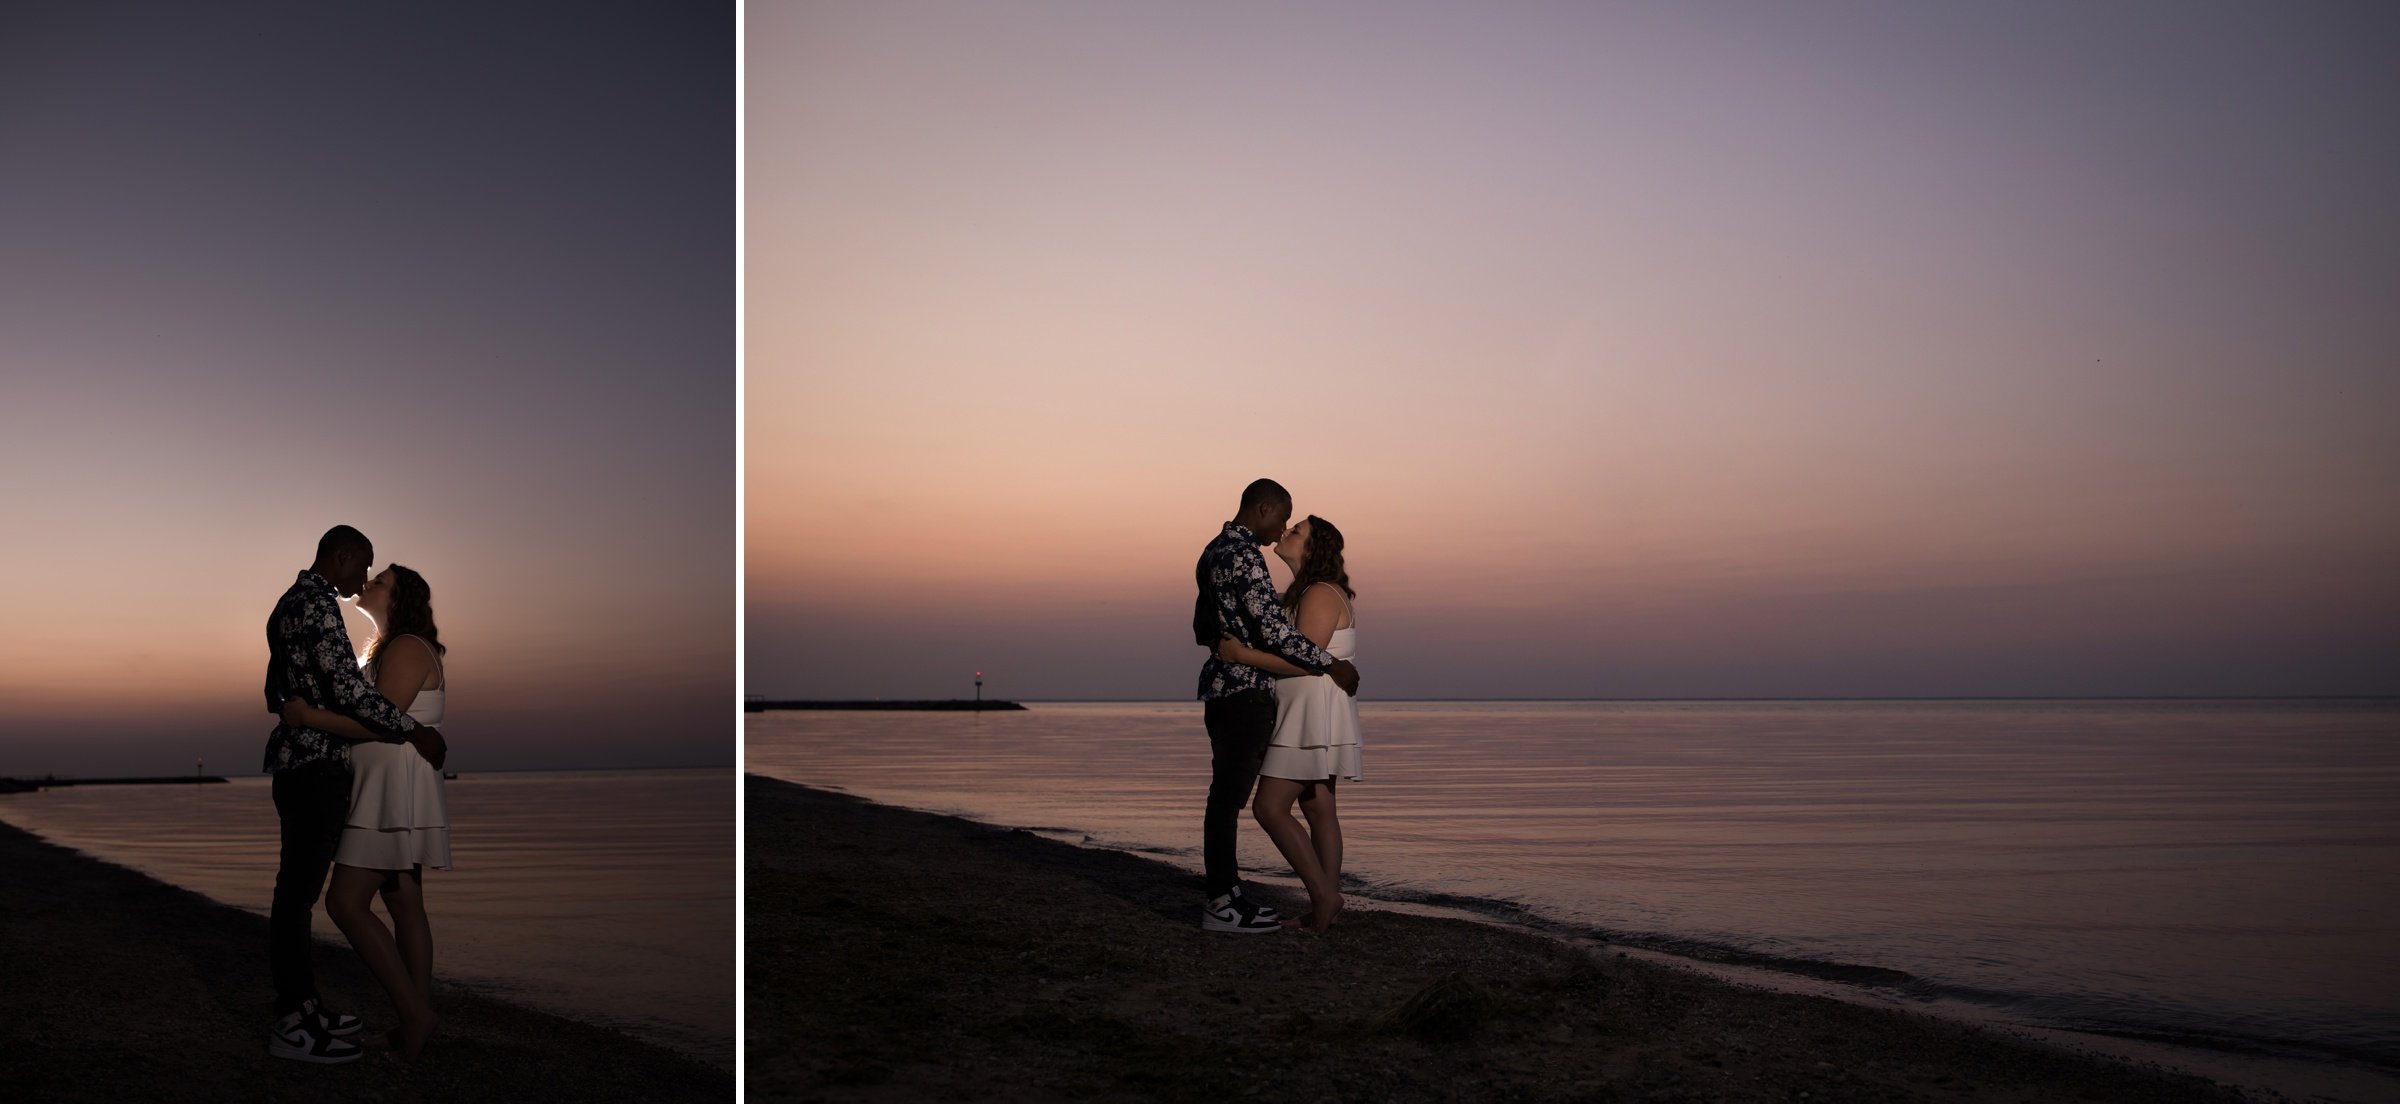 Jessica and Paul - A Sunset Bay Shore Park Engagement Session68.jpg